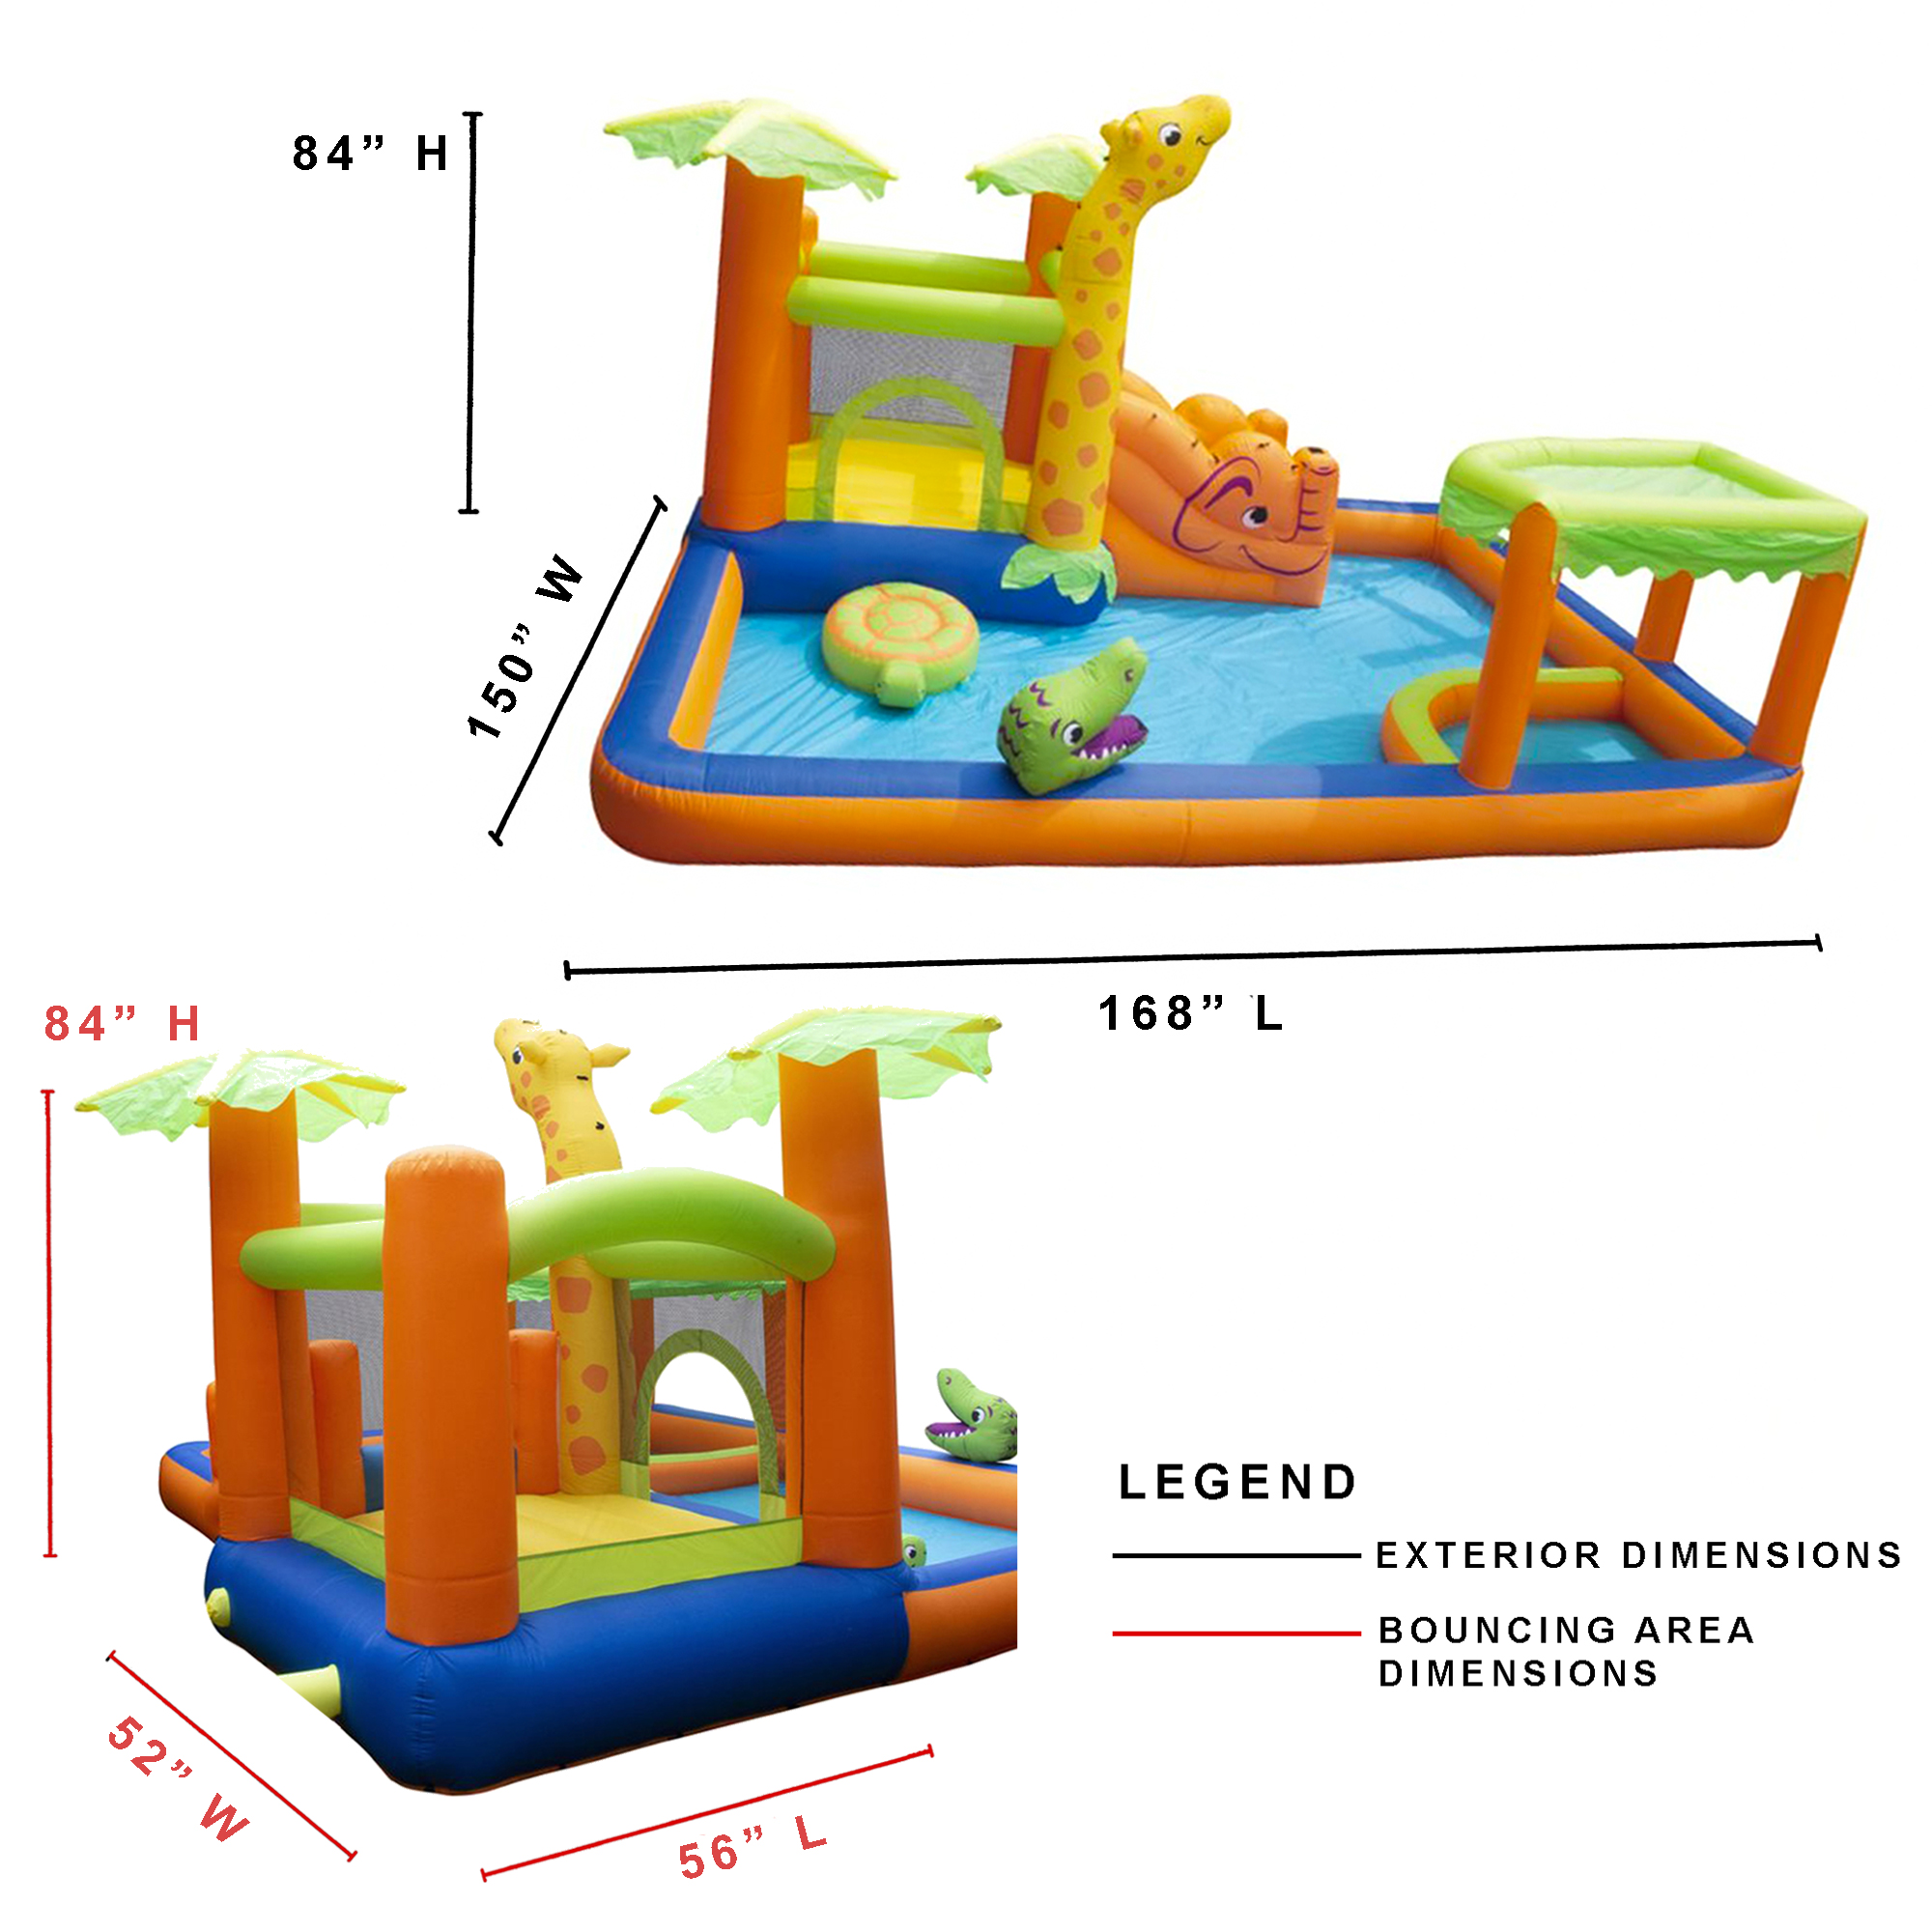 Banzai Safari Splash Water Park Inflatable Bouncer with Cannon and Blower - image 6 of 12